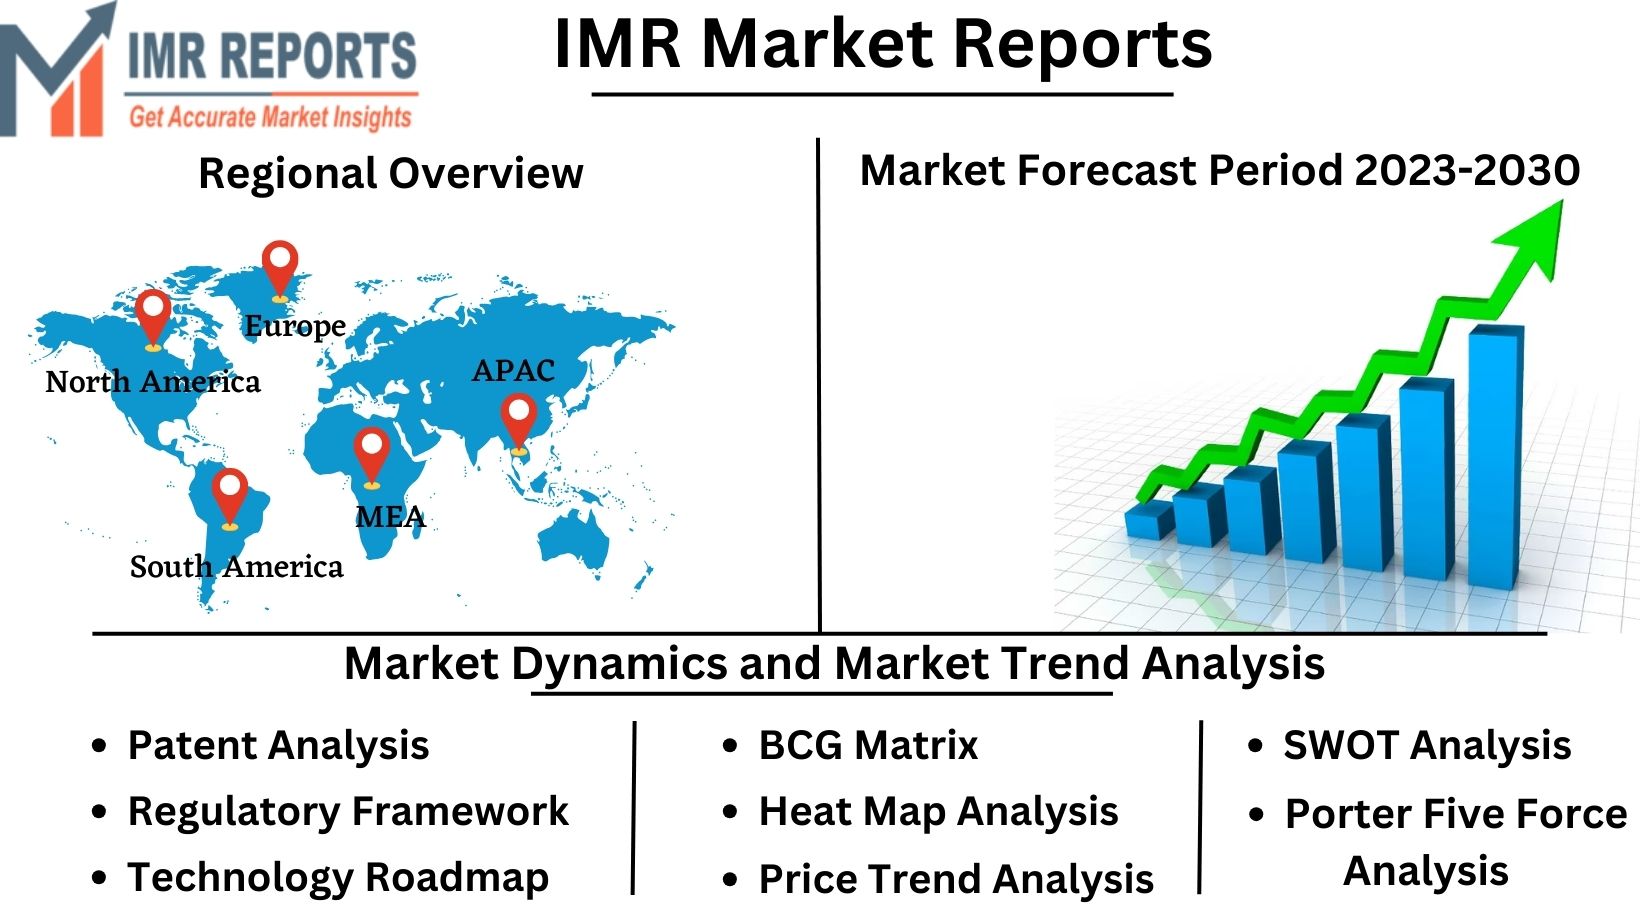 IMR_Market_Reports_(1)69